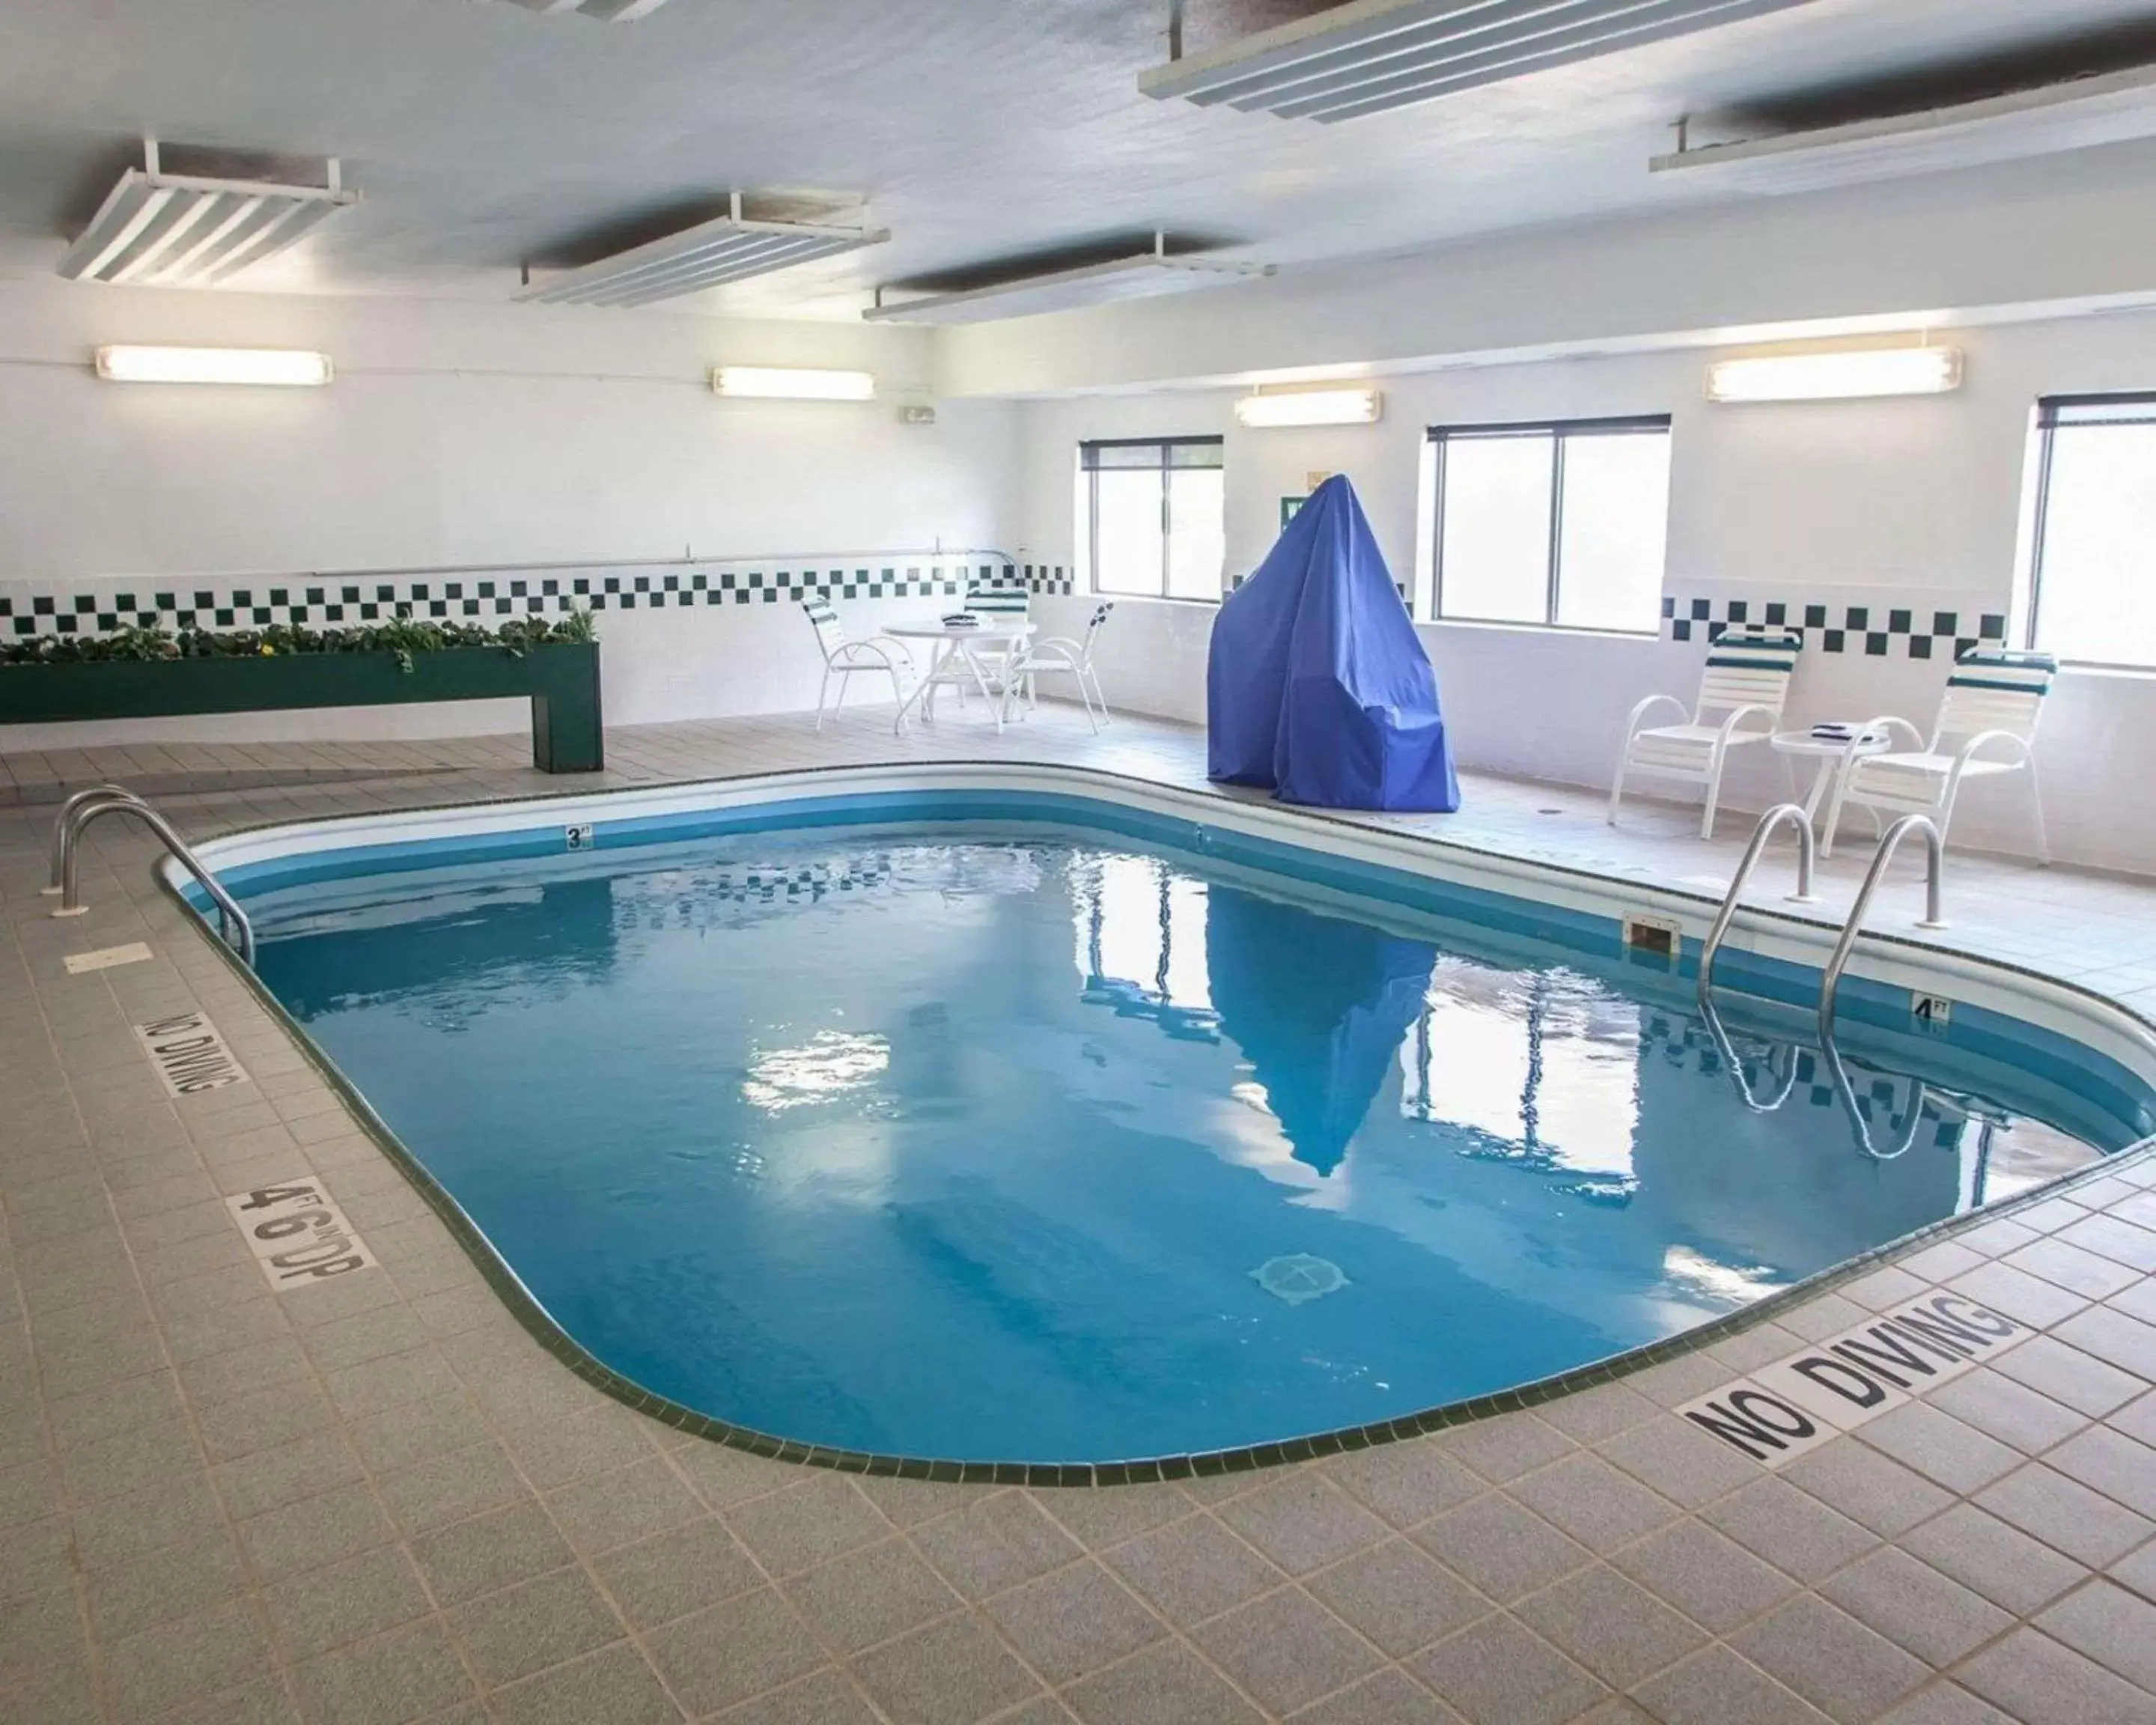 On site, Swimming Pool in Quality Inn near I-72 and Hwy 51